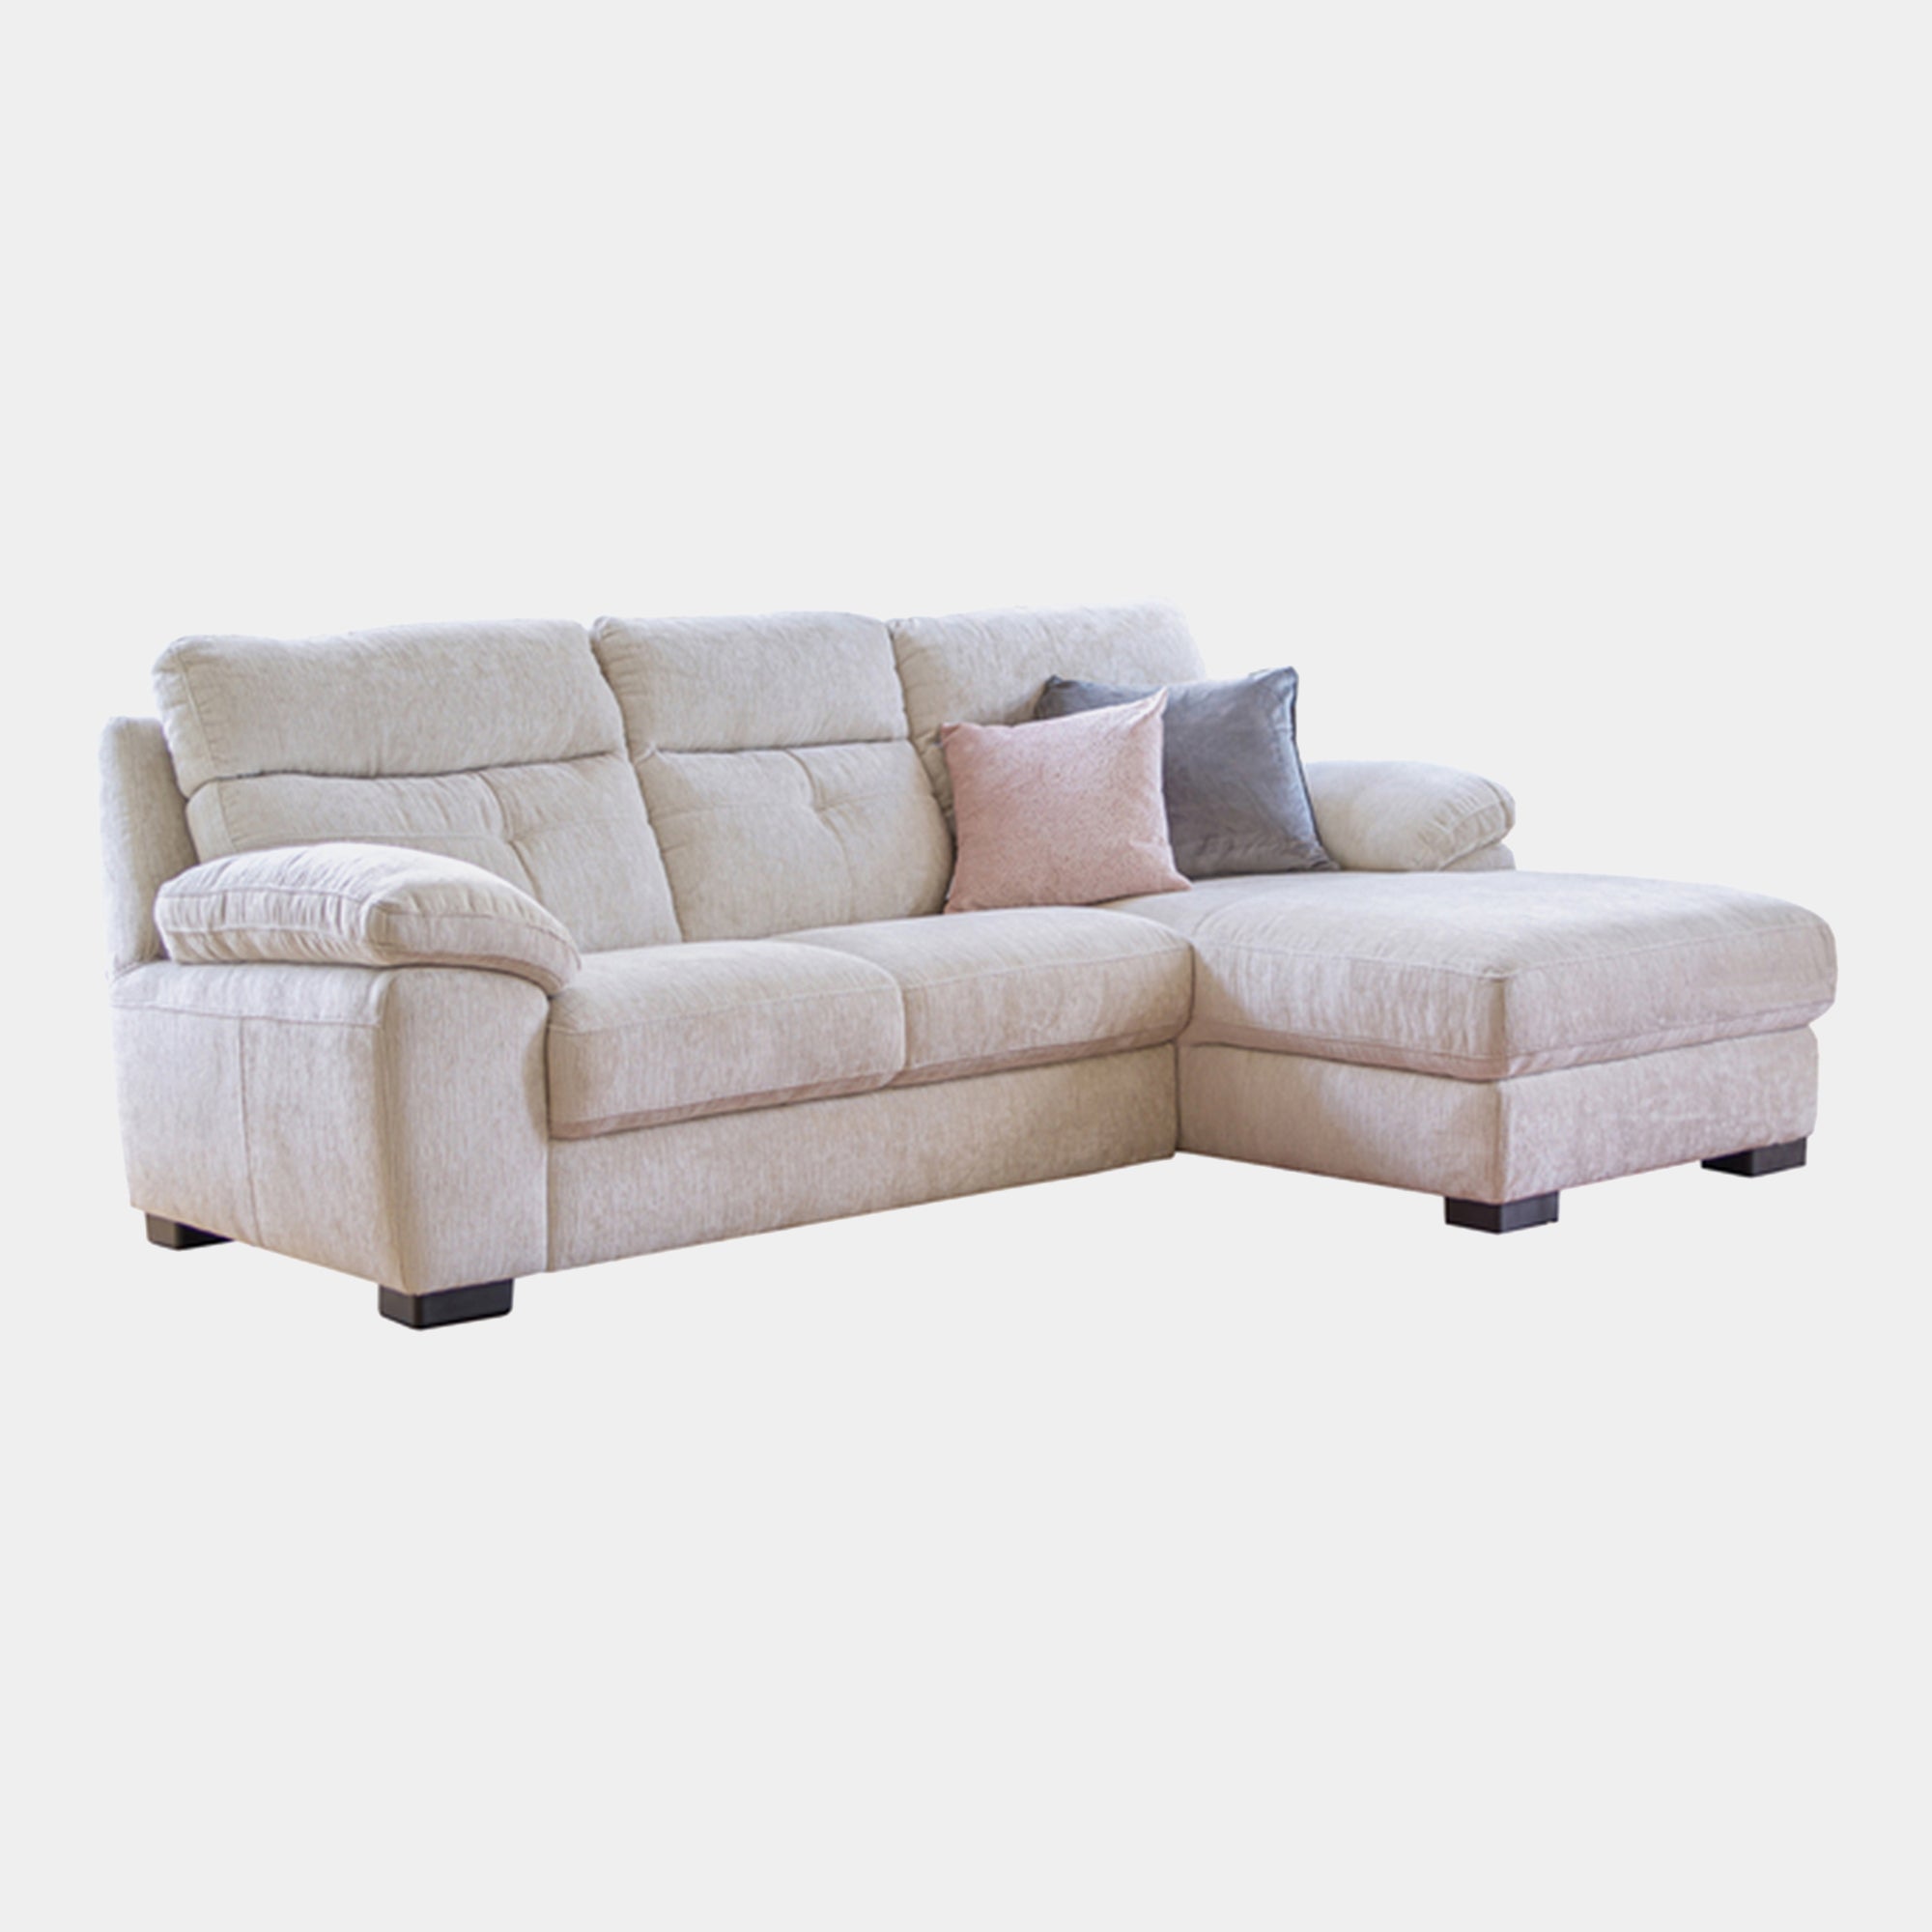 2 Seat Sofa 1 Arm LHF With RHF Chaise In Fabric BSF30